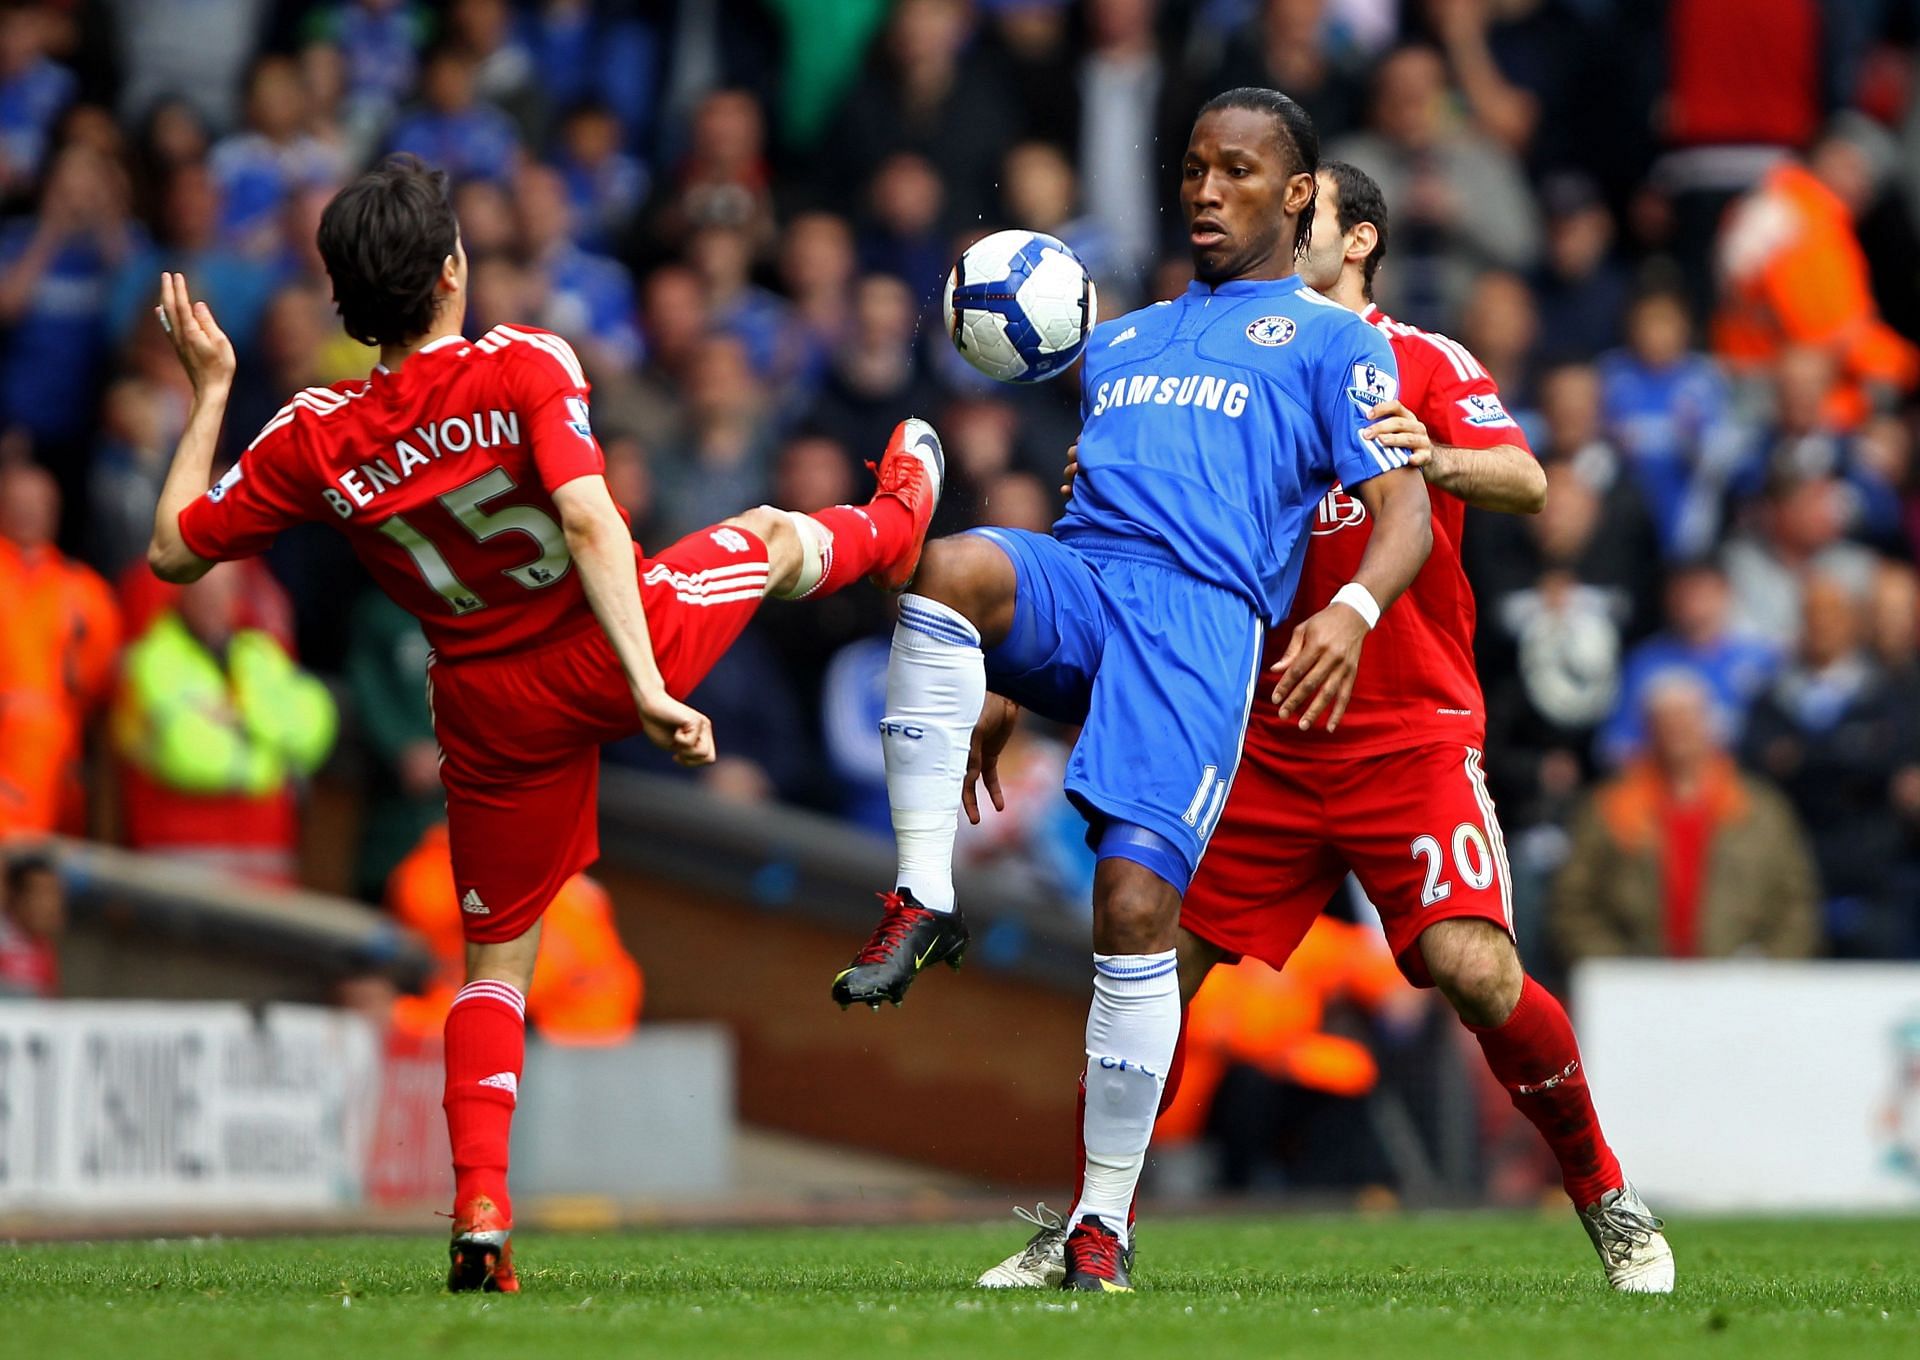 Didier Drogba in action for Chelsea in the FA Cup